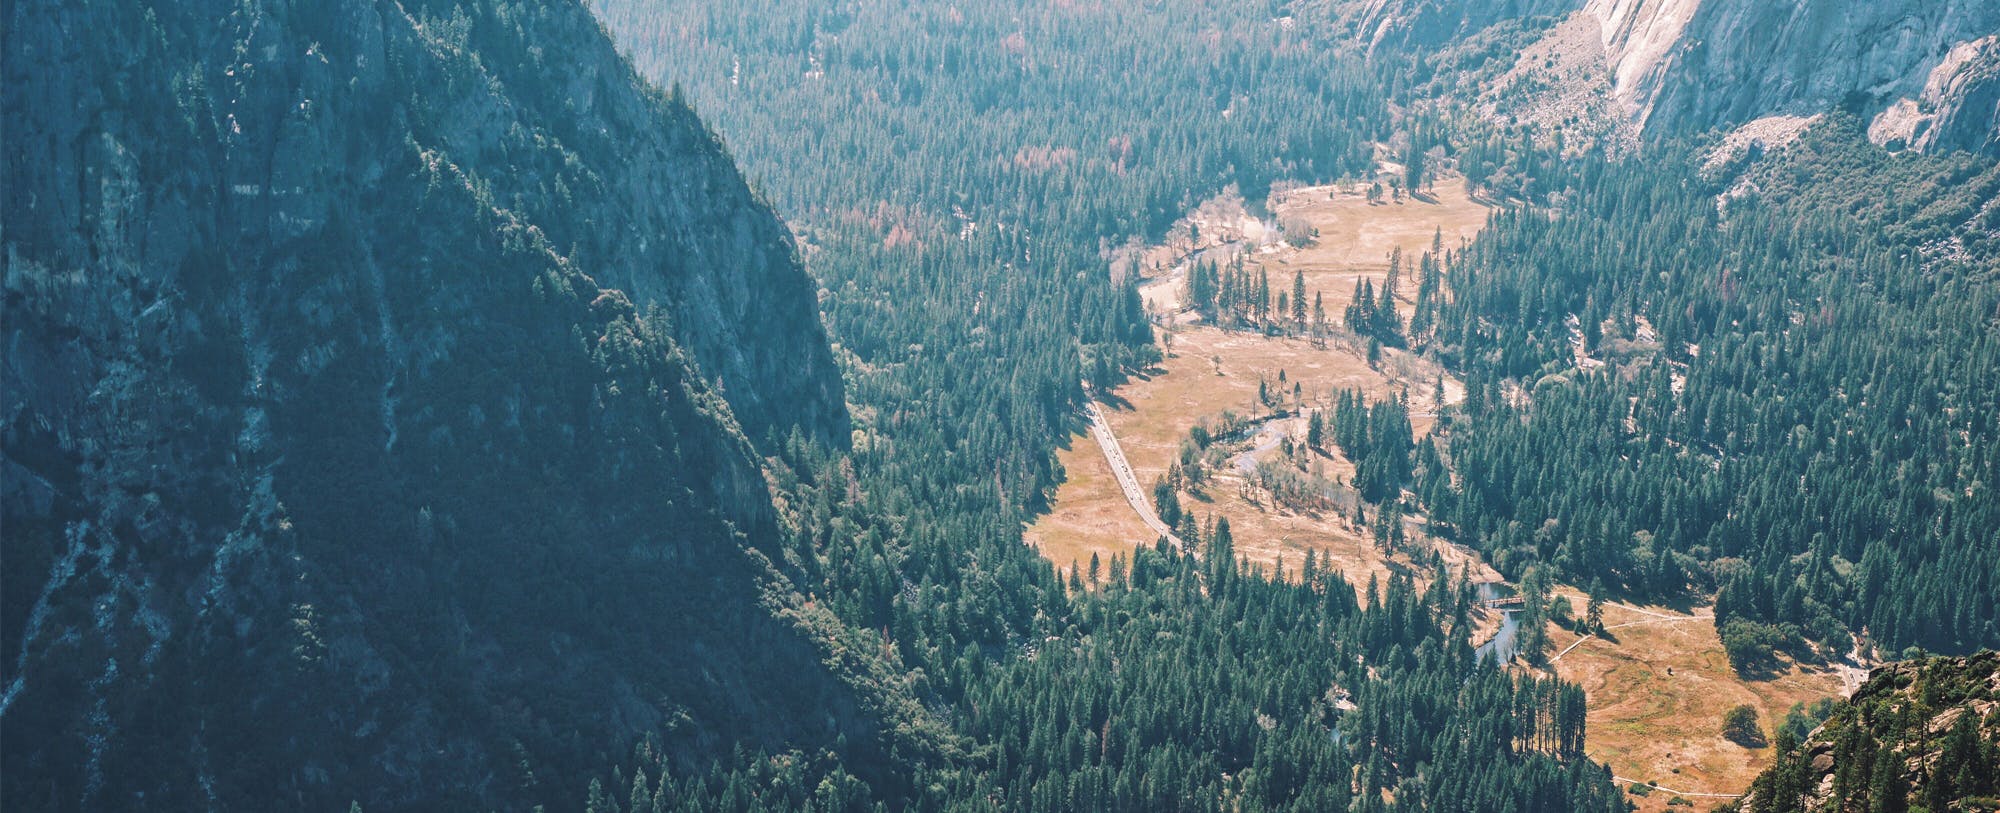 Yosemite Gets an Upgrade: 400 new acres donated to the national park